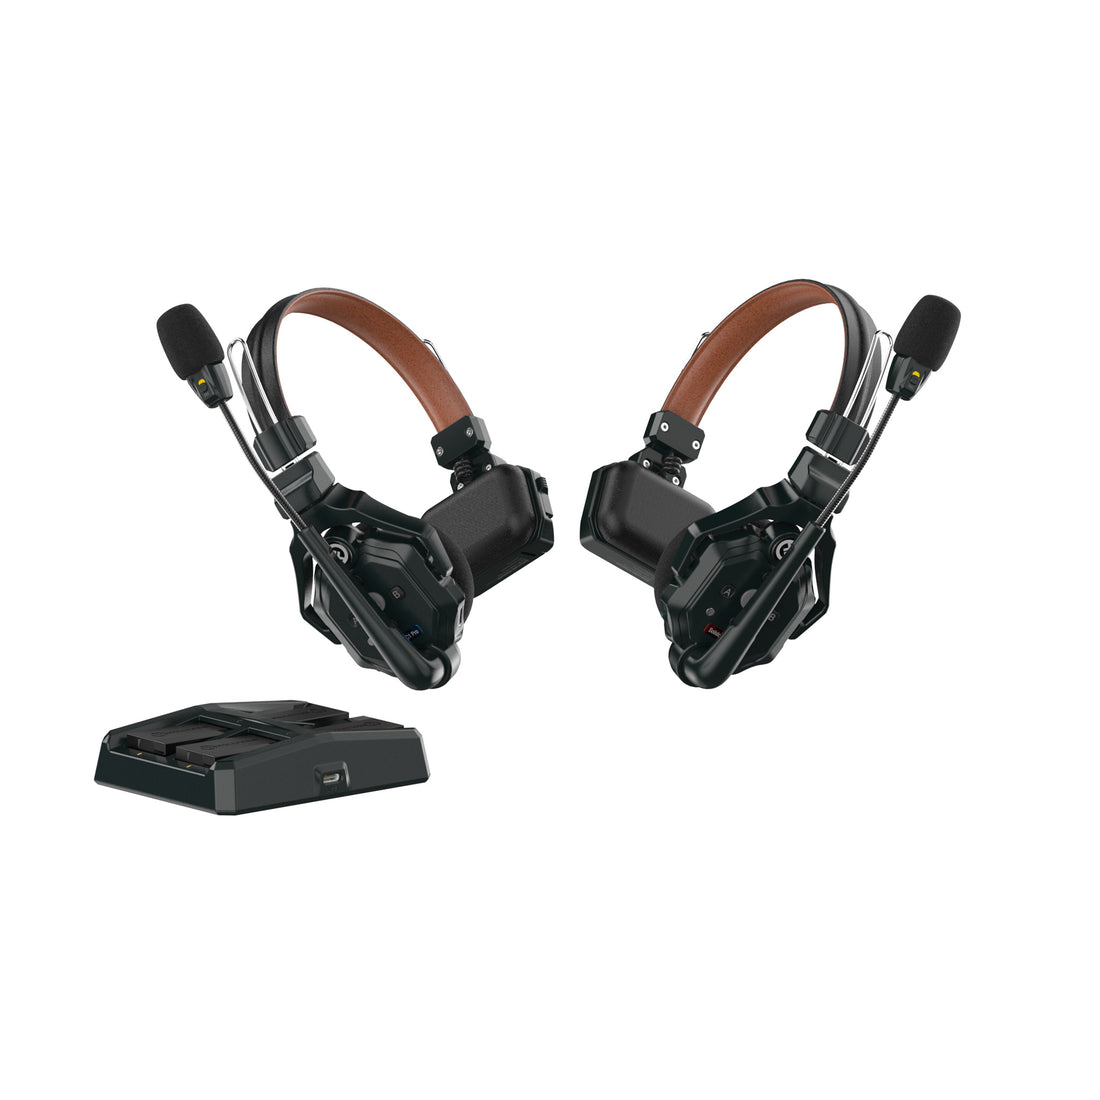 Hollyland Solidcom C1 Pro Wireless Intercom Headsets with Noise  Cancellation